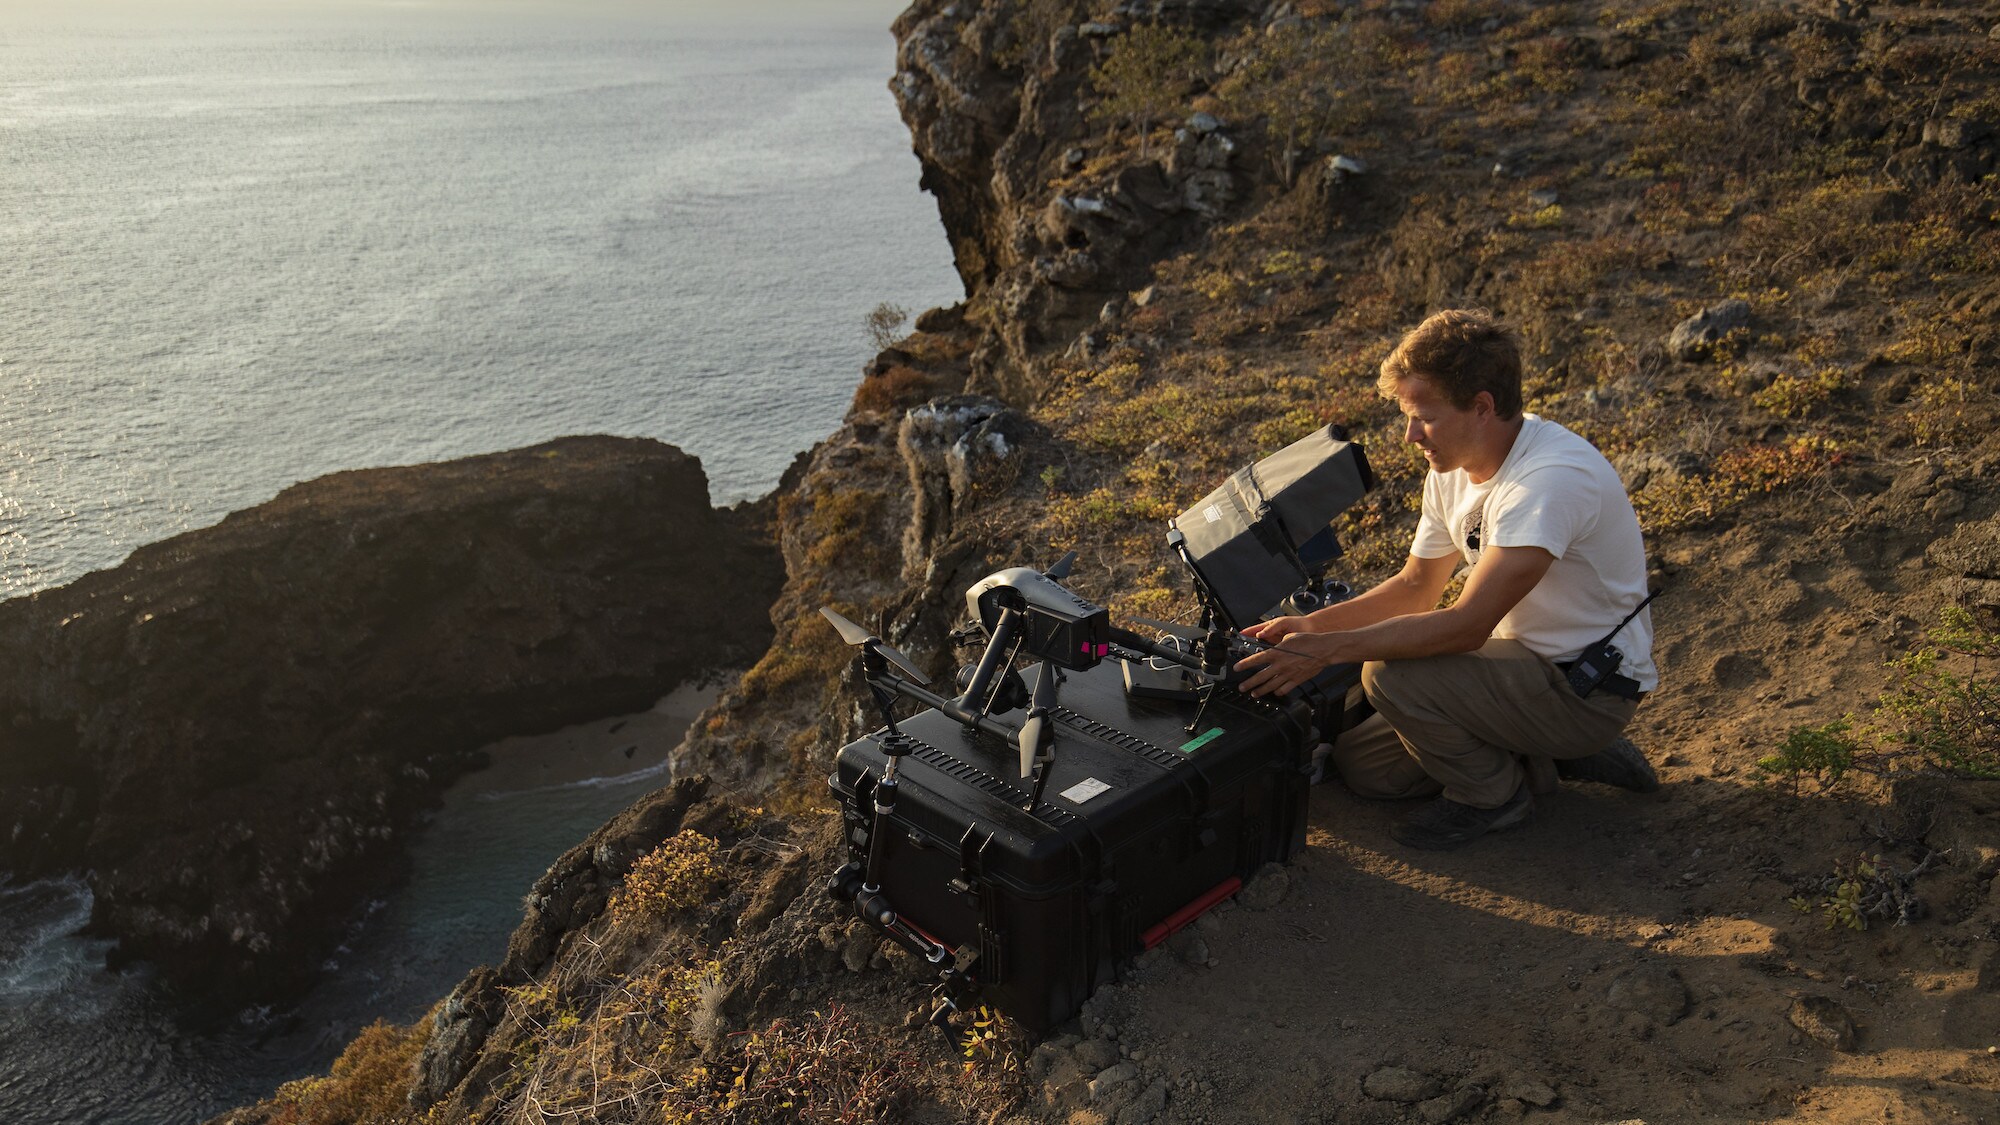 Bertie Gregory sits on the rocks as he views drone footage. (National Geographic for Disney+/Rakel Hansen)